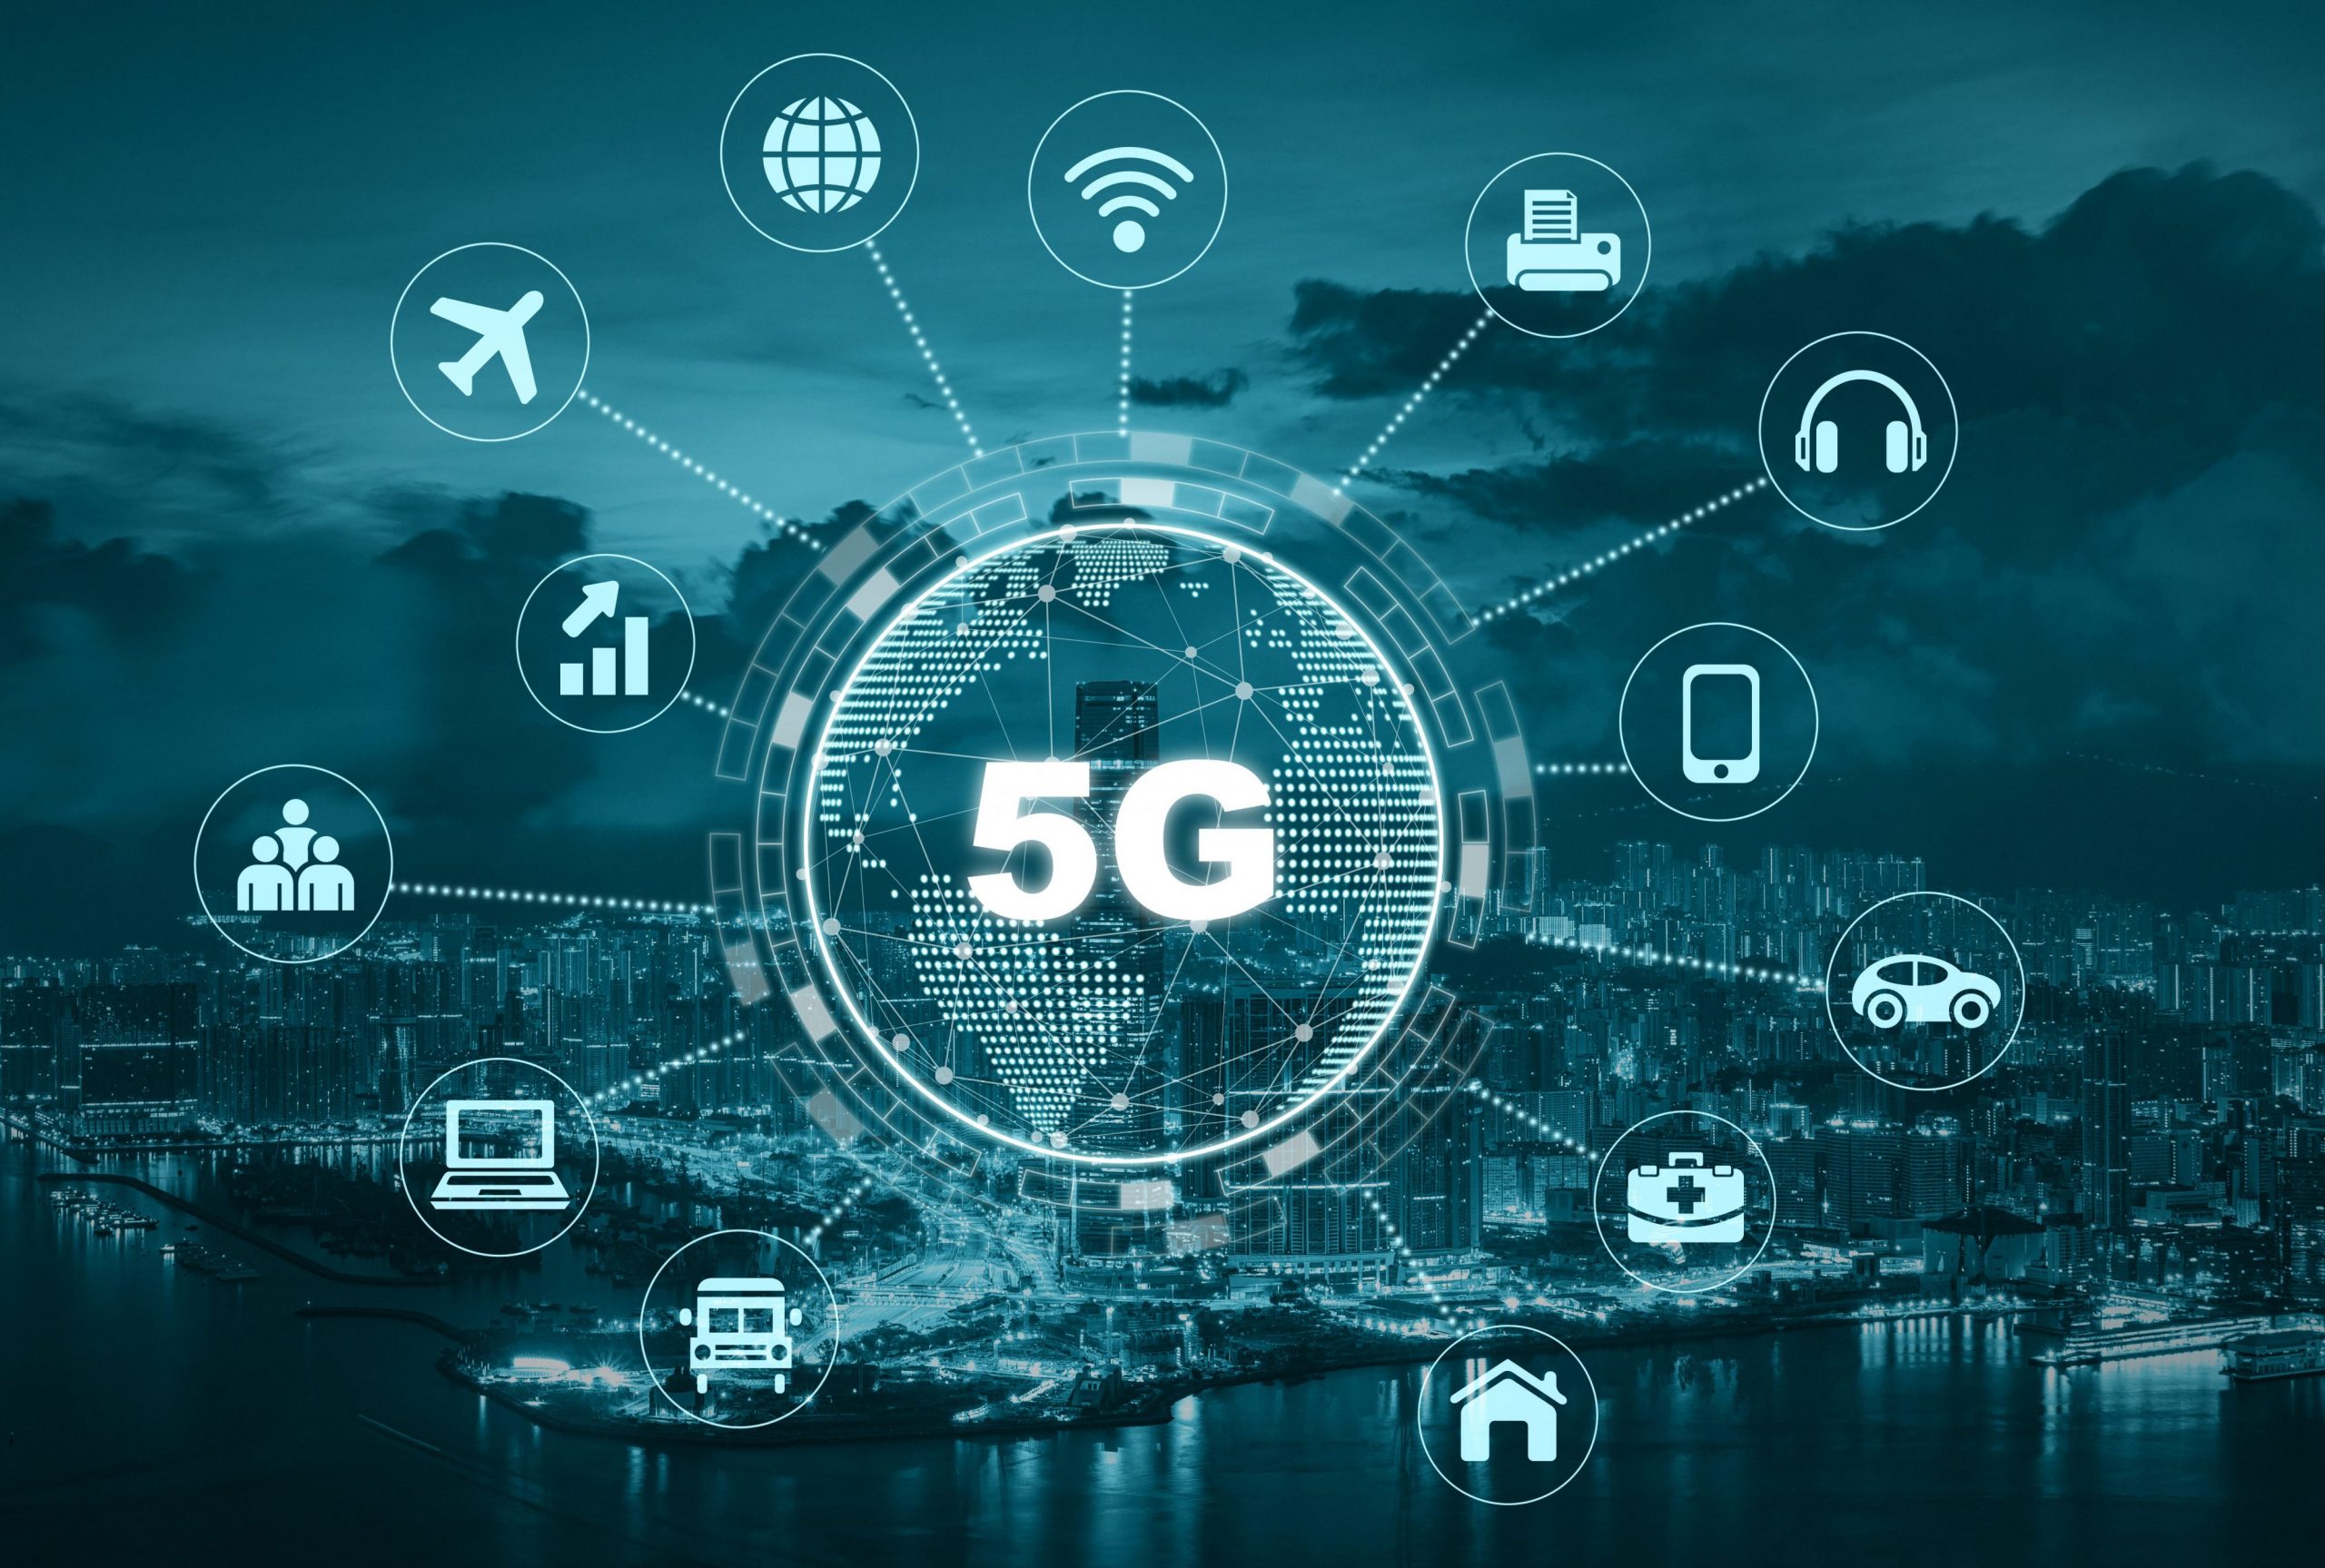 5G is faster and more stable than 4G